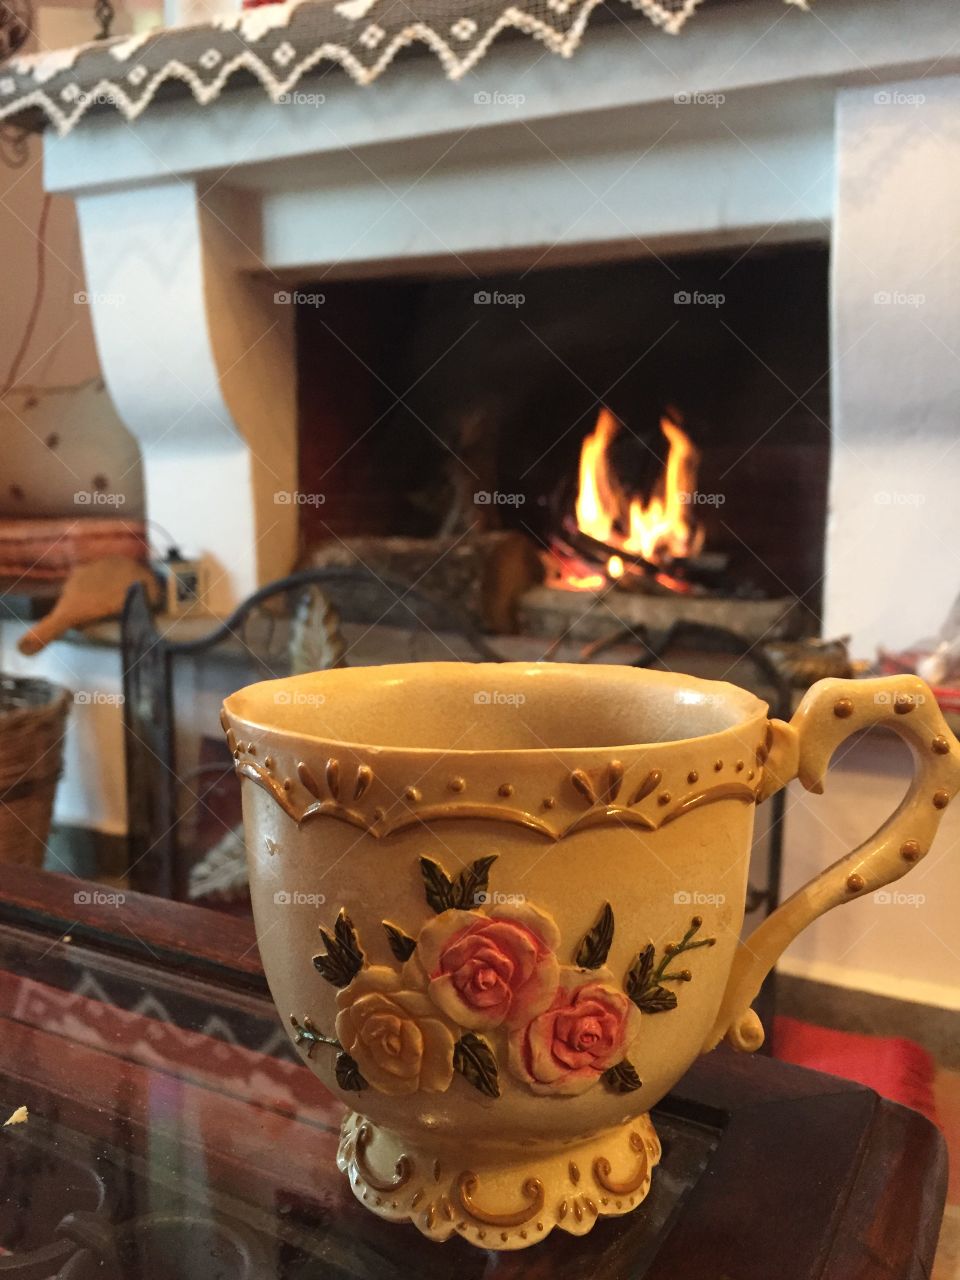 A beautiful cup of coffee, in front of fireplace !!